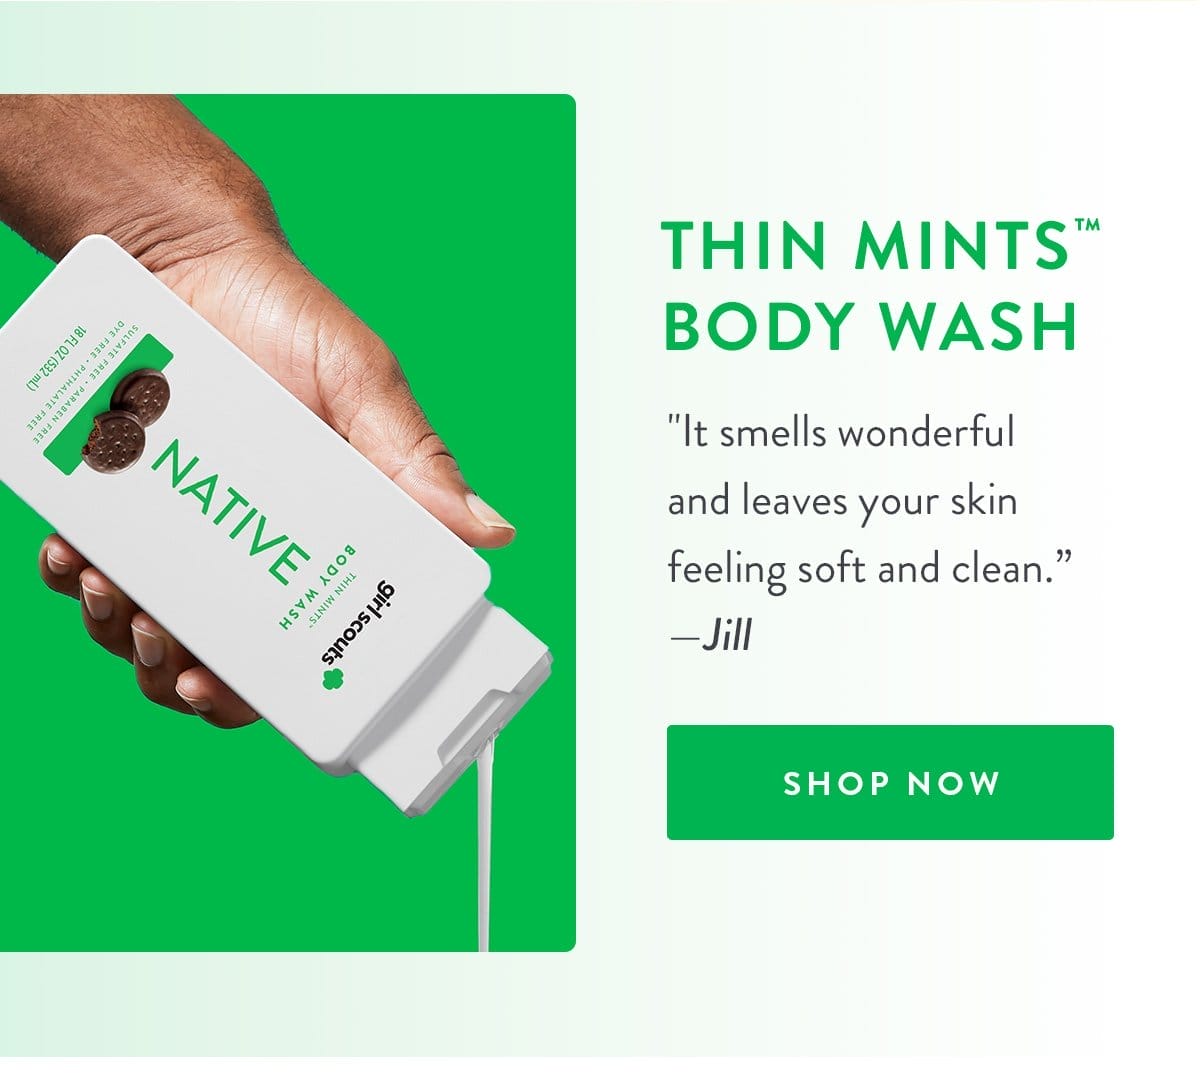 Thin Mints™ Body Wash | ‘It smells wonderful and leaves your skin feeling soft and clean.’ - Jill | SHOP NOW